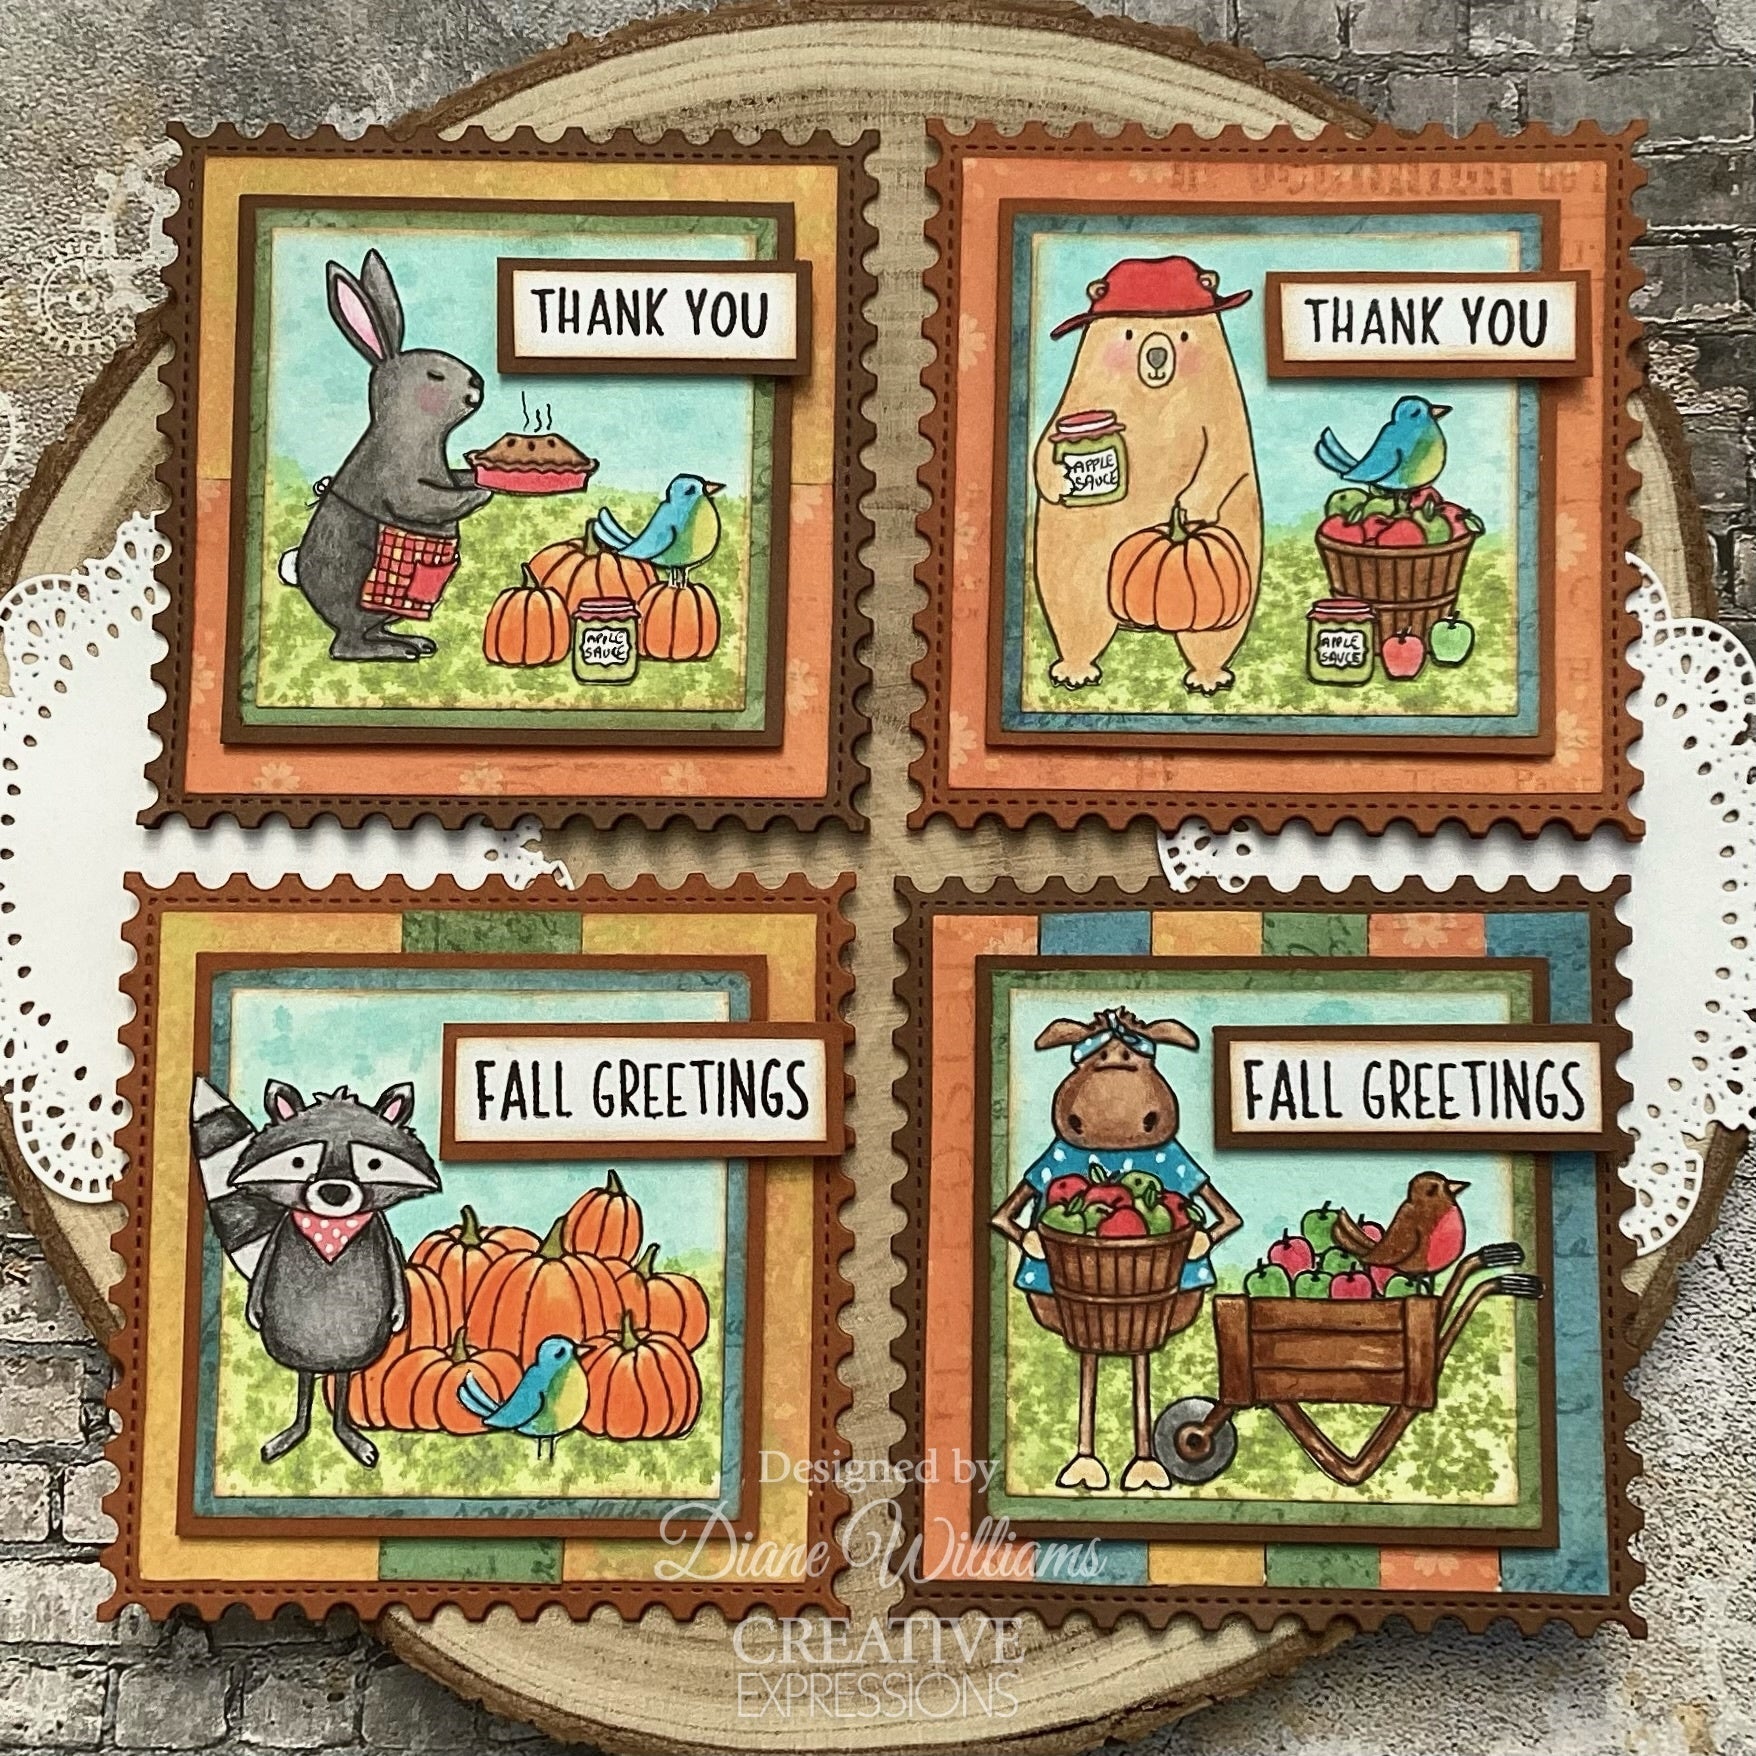 Creative Expressions Jane's Doodles Apple Pumpkin Spice 6 in x 8 in Clear Stamp Set